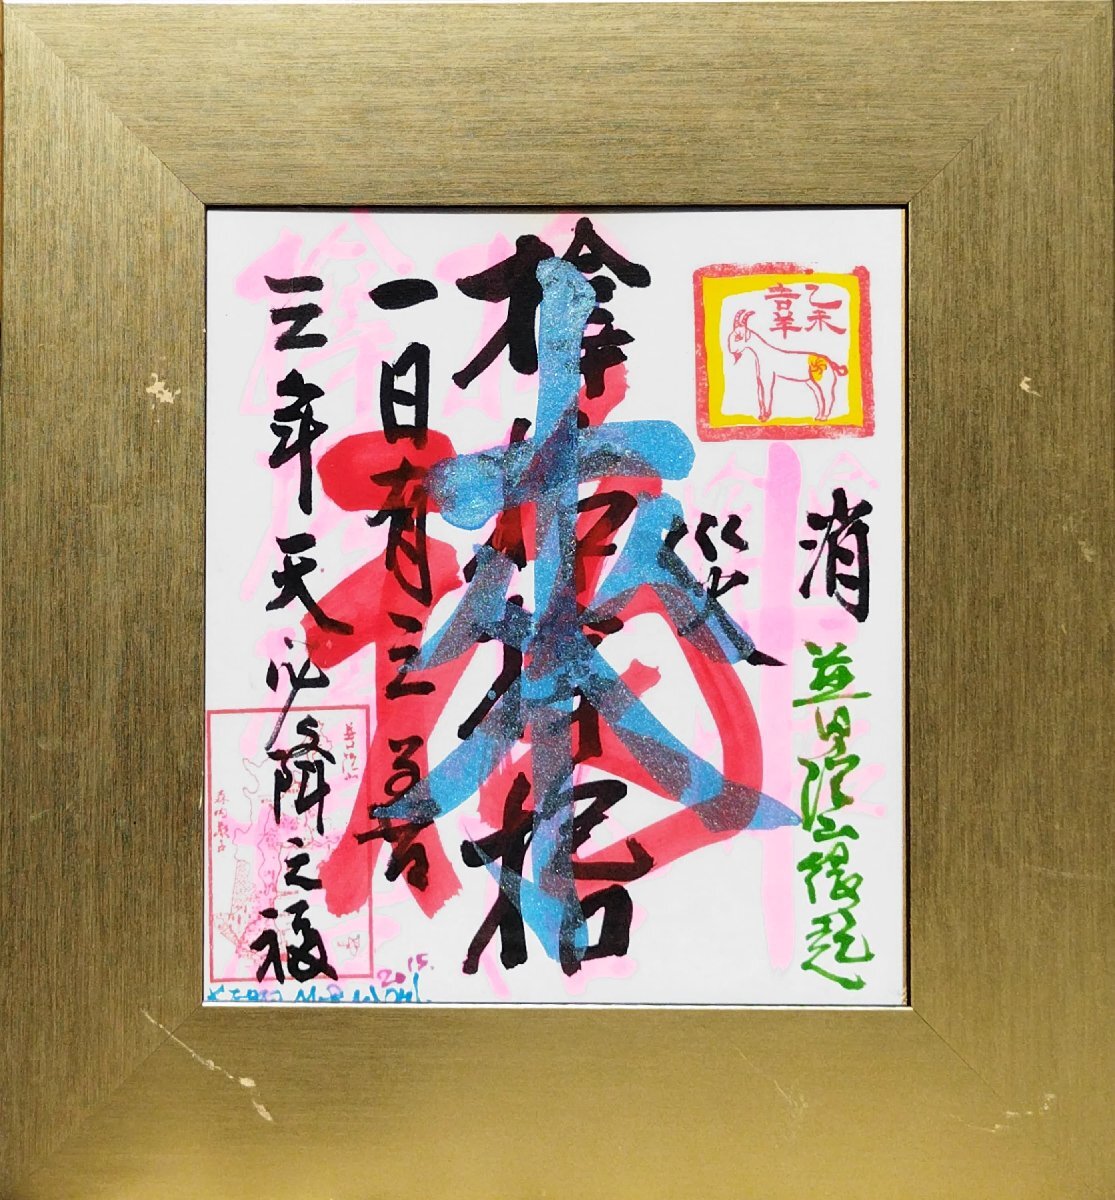 Guaranteed authentic Keiko Moriuchi Mixed media work on colored paper Signed and framed by Gutai Art Association Jiro Yoshihara, Artwork, Painting, others